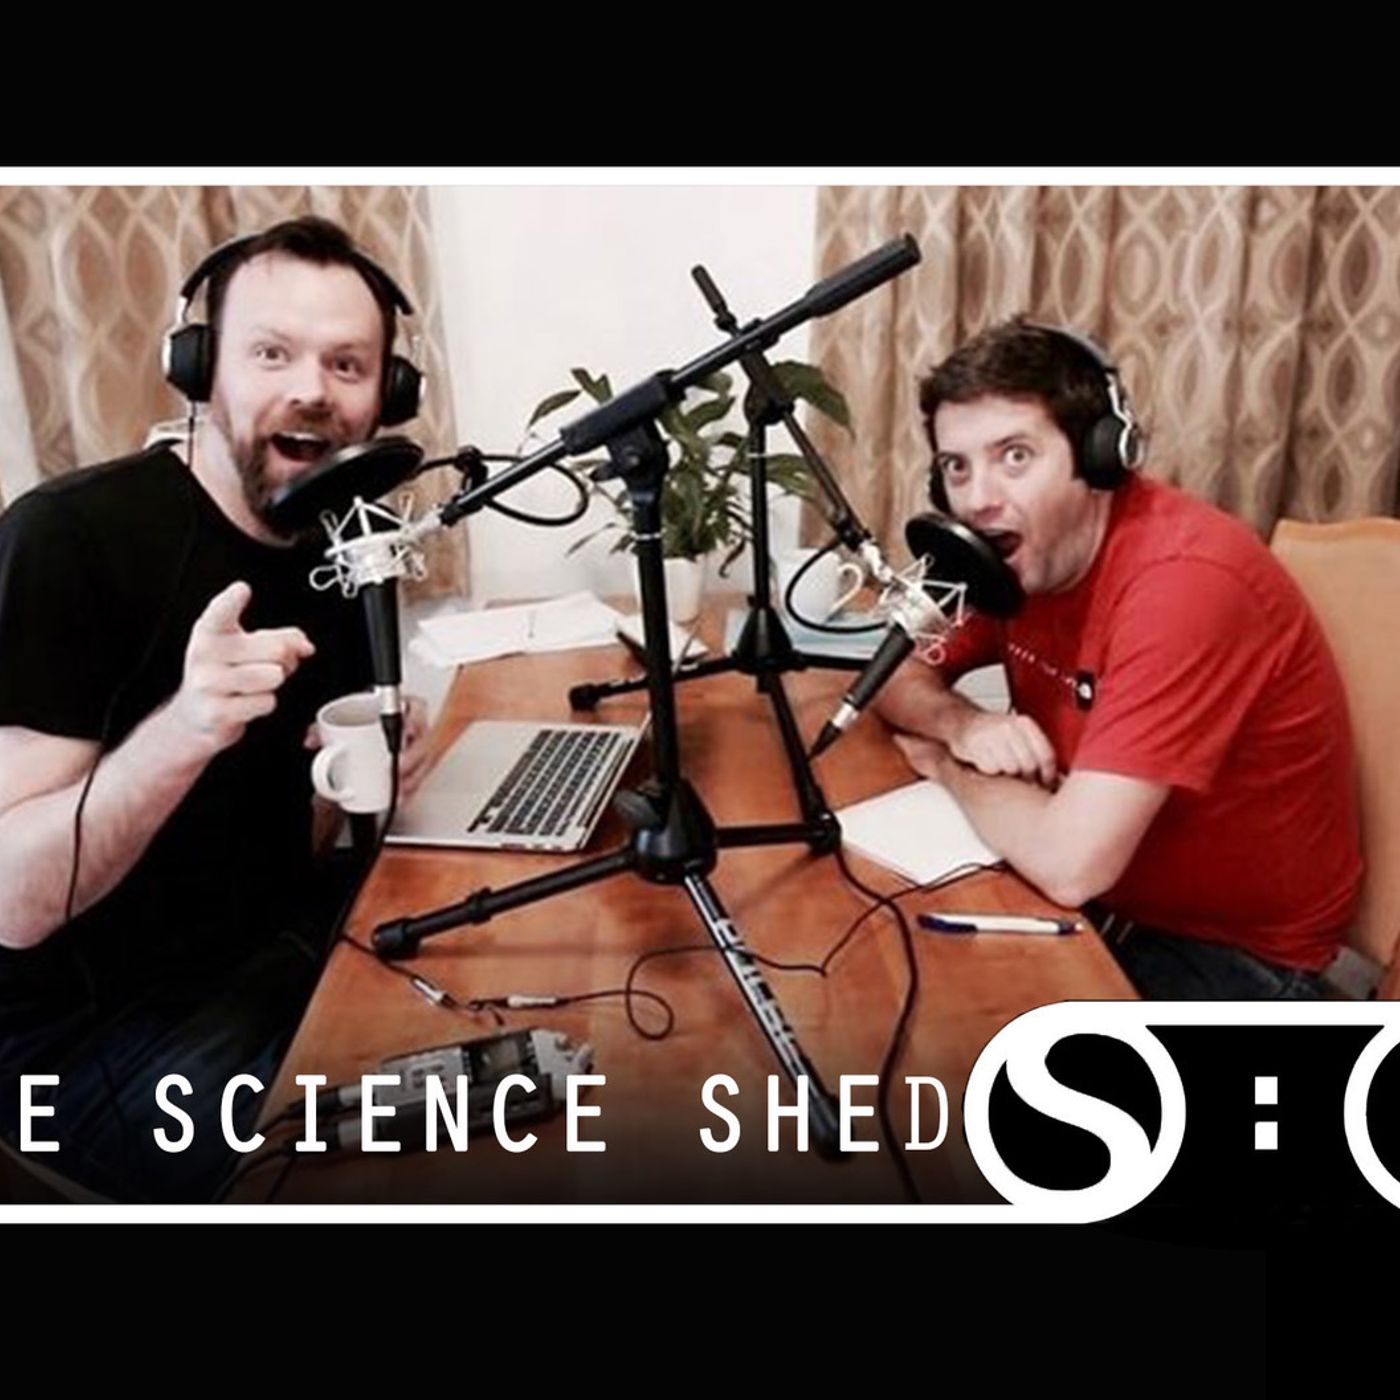 87: The Science Shed (ft. Steven Lee and Nick Evans)